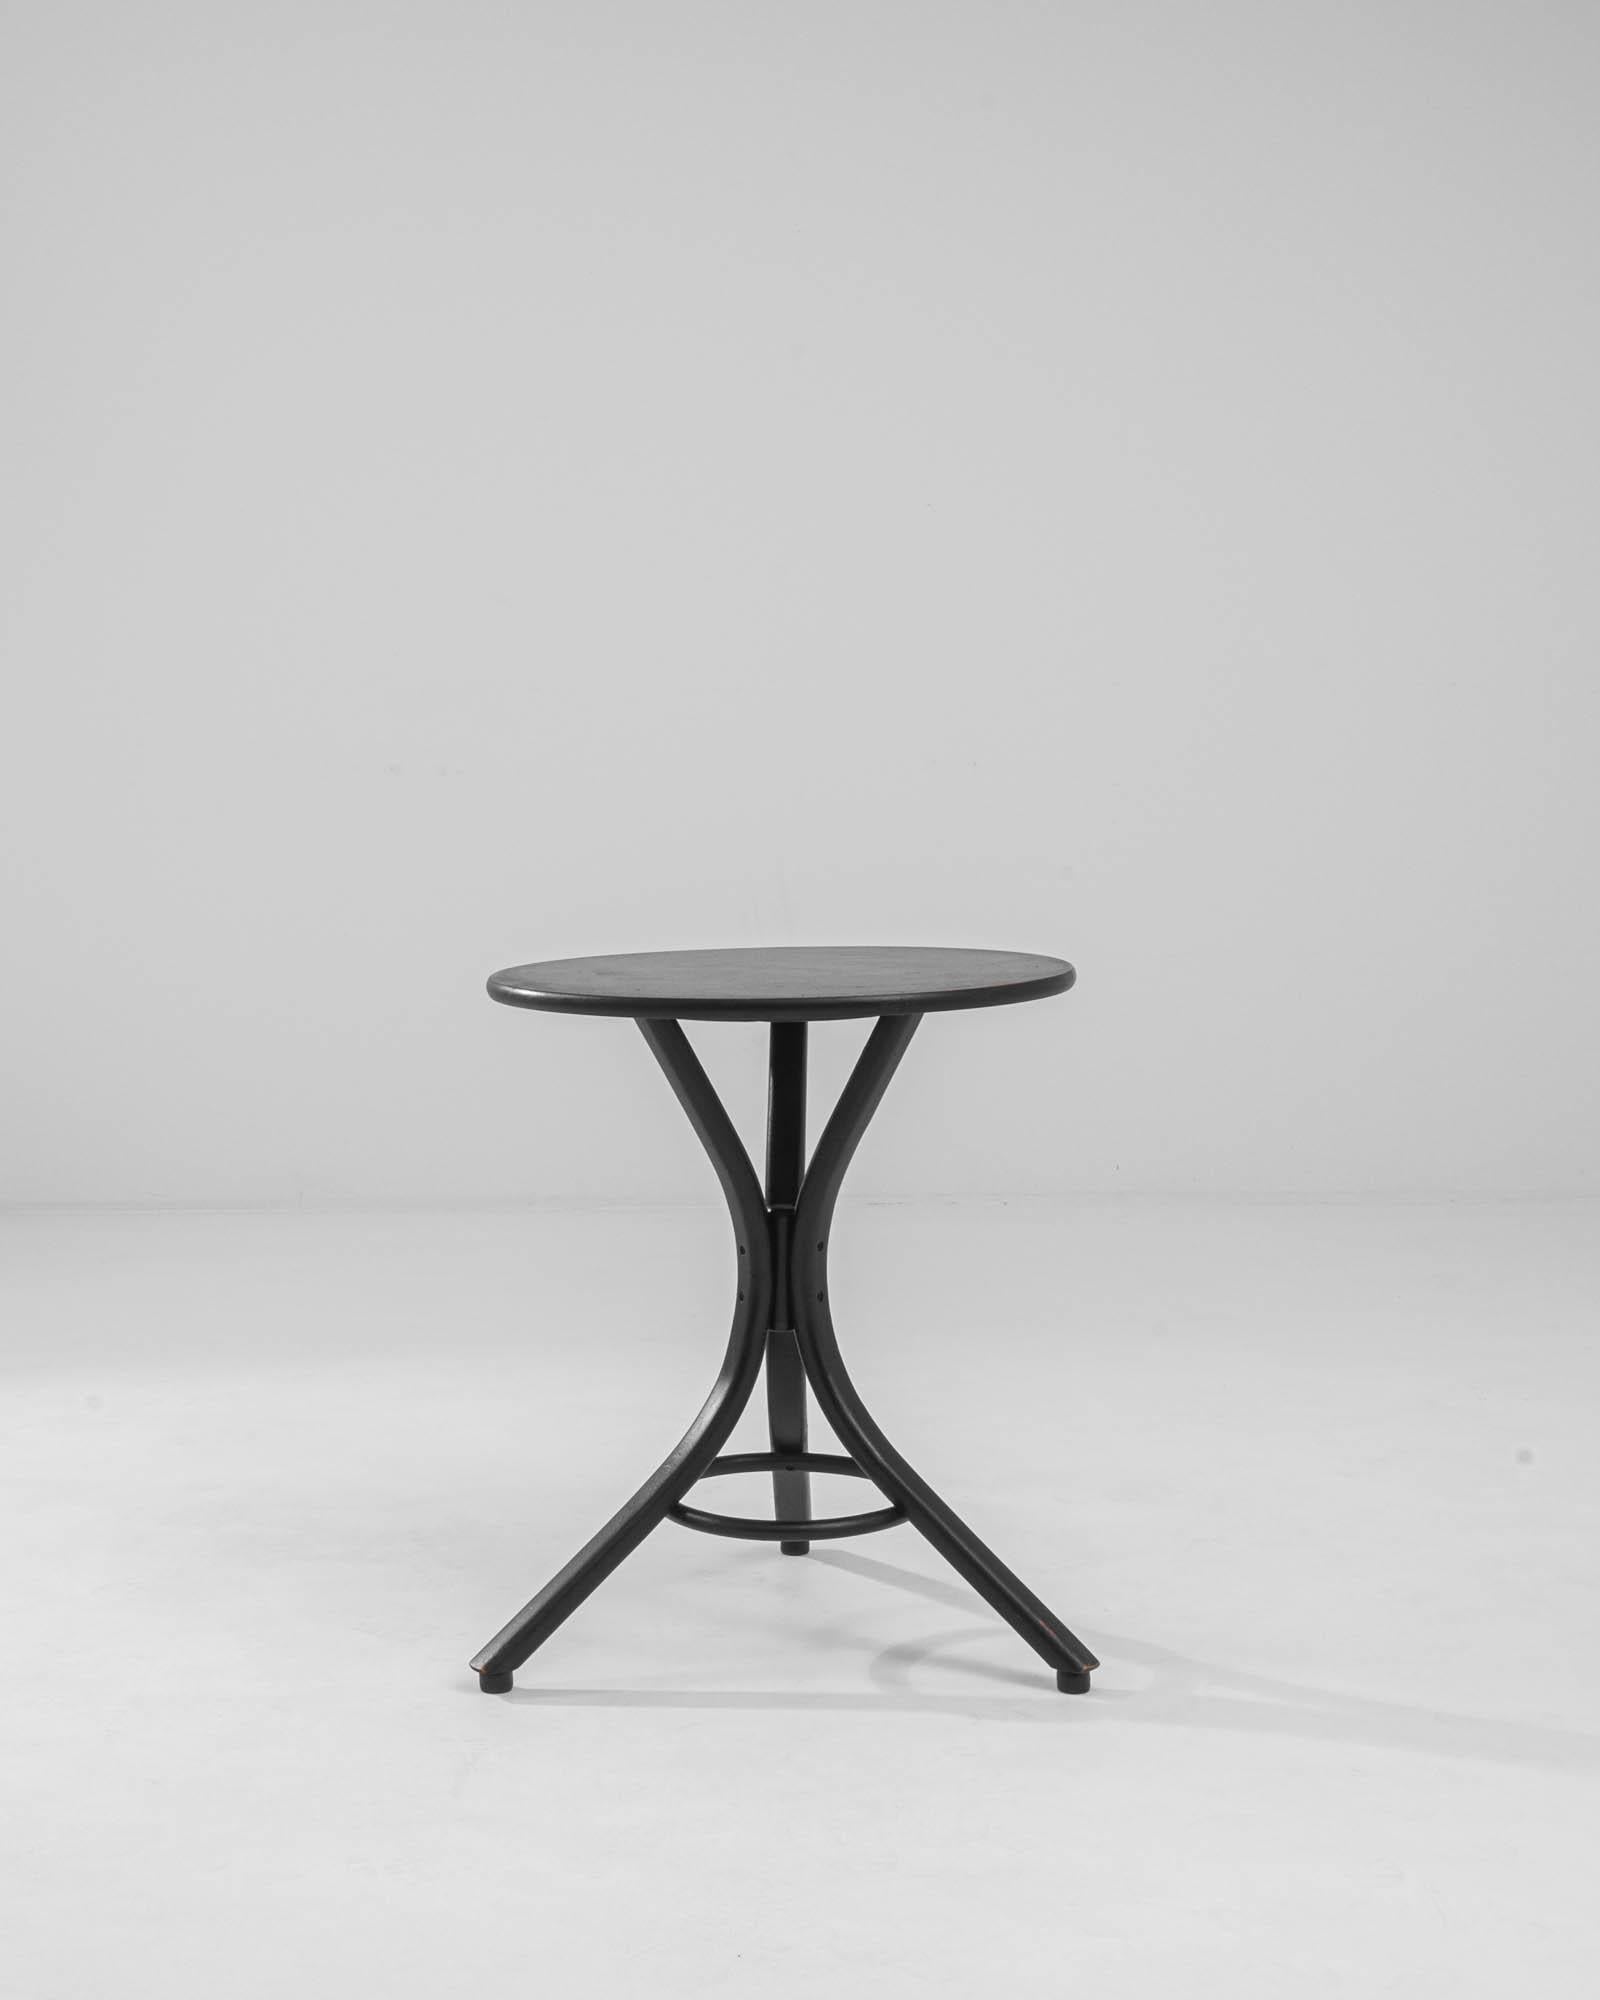 A pair of bentwood tables made in 20th century Austria, in the style of Thonet. A tripod of slender curving legs meet at the table’s center and taper outwards, supported by a thin circular stretcher. The black paint that covers the table’s surface